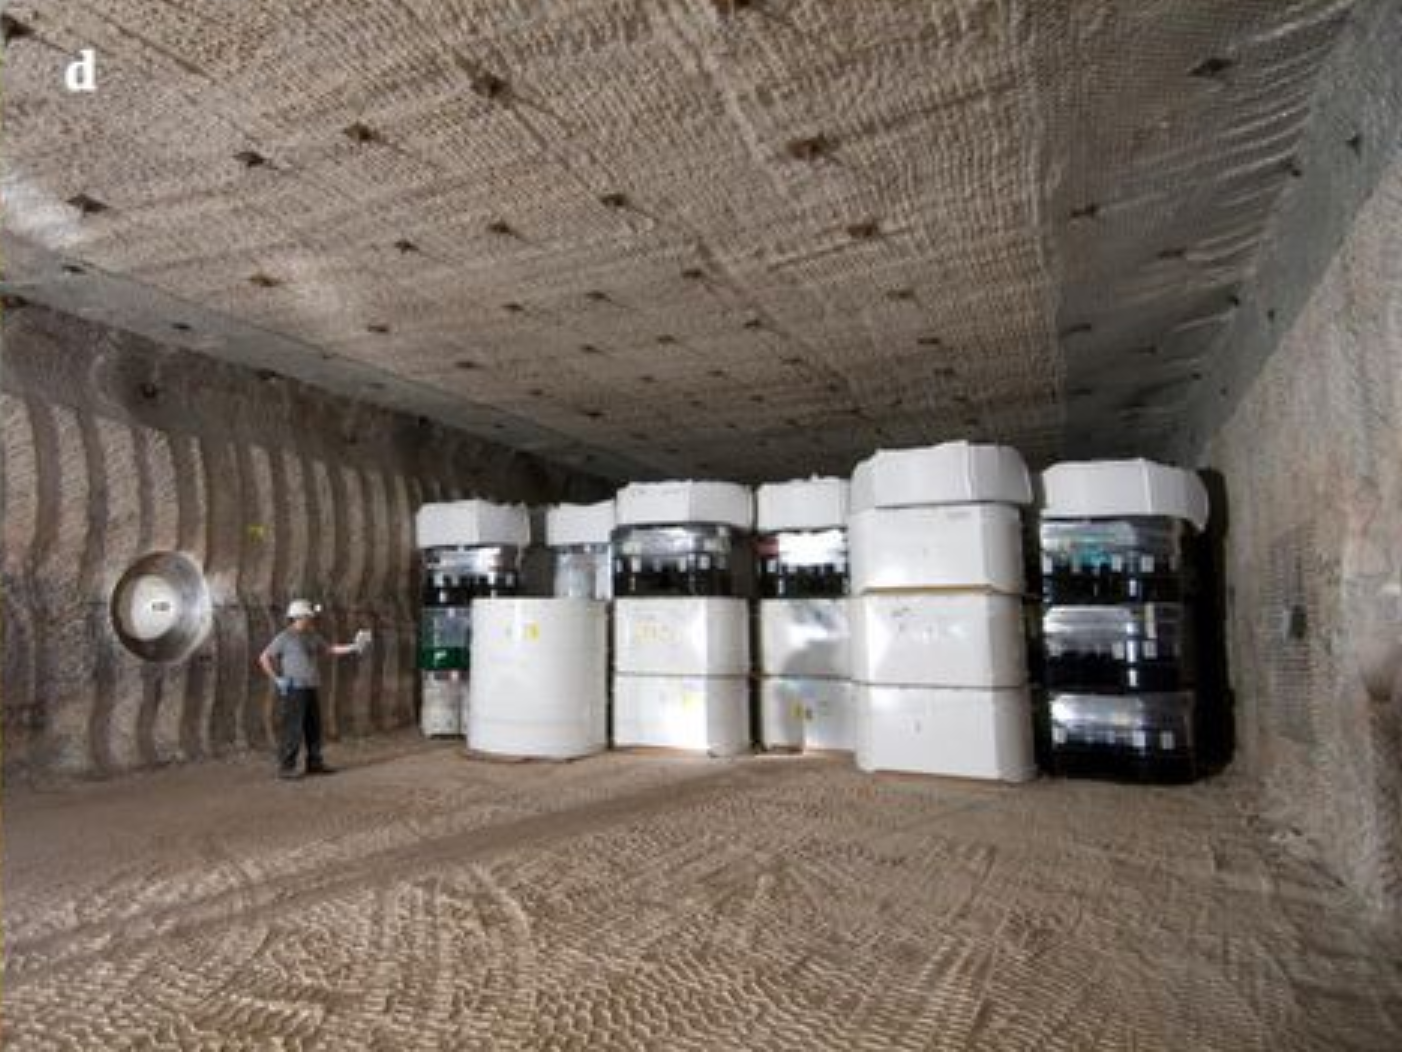  The Waste Isolation Pilot Plant (WIPP) is located in the massive salt of the Salado Formation. b. Contact Handled transuranic nuclear waste being transported to the WIPP site in New Mexico in TRUPac II containers. c. Remote Handled nuclear waste being transported to the WIPP site in a 72B cask. d. Over 10,000 nuclear waste drums and standard waste boxes filling 1 of 56 rooms to be filled at WIPP. Note the higher activity remote handled waste plunged into boreholes in the wall to the right (like SNF could be) and plugged with a 4-foot metal-wrapped cement plug. The Valentine’s Day leak of 2014 occurred from a single drum in Panel 7 Room 7. Source: DOE CBFO